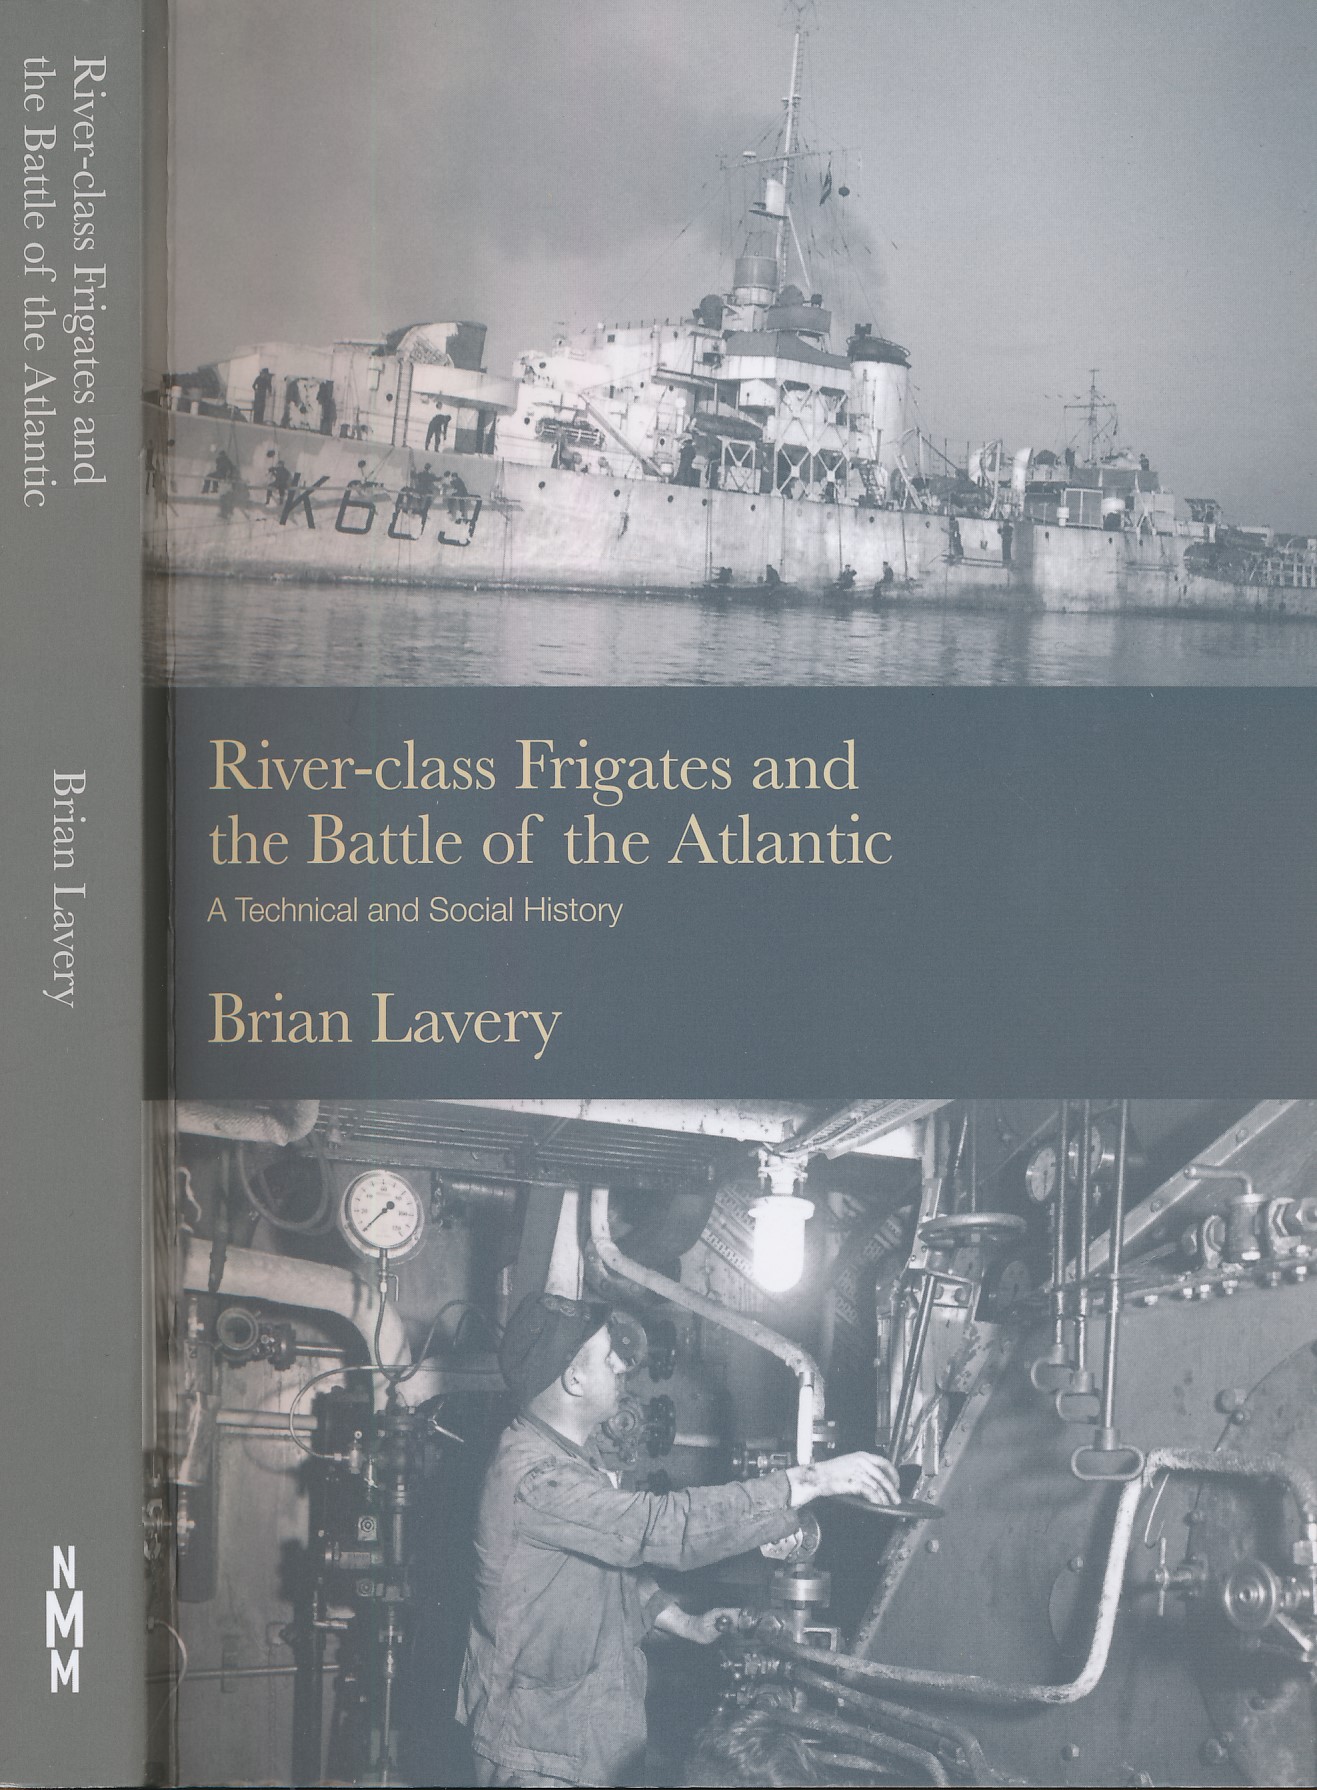 River-class Frigates and the Battle of the Atlantic. A Technical and Social History